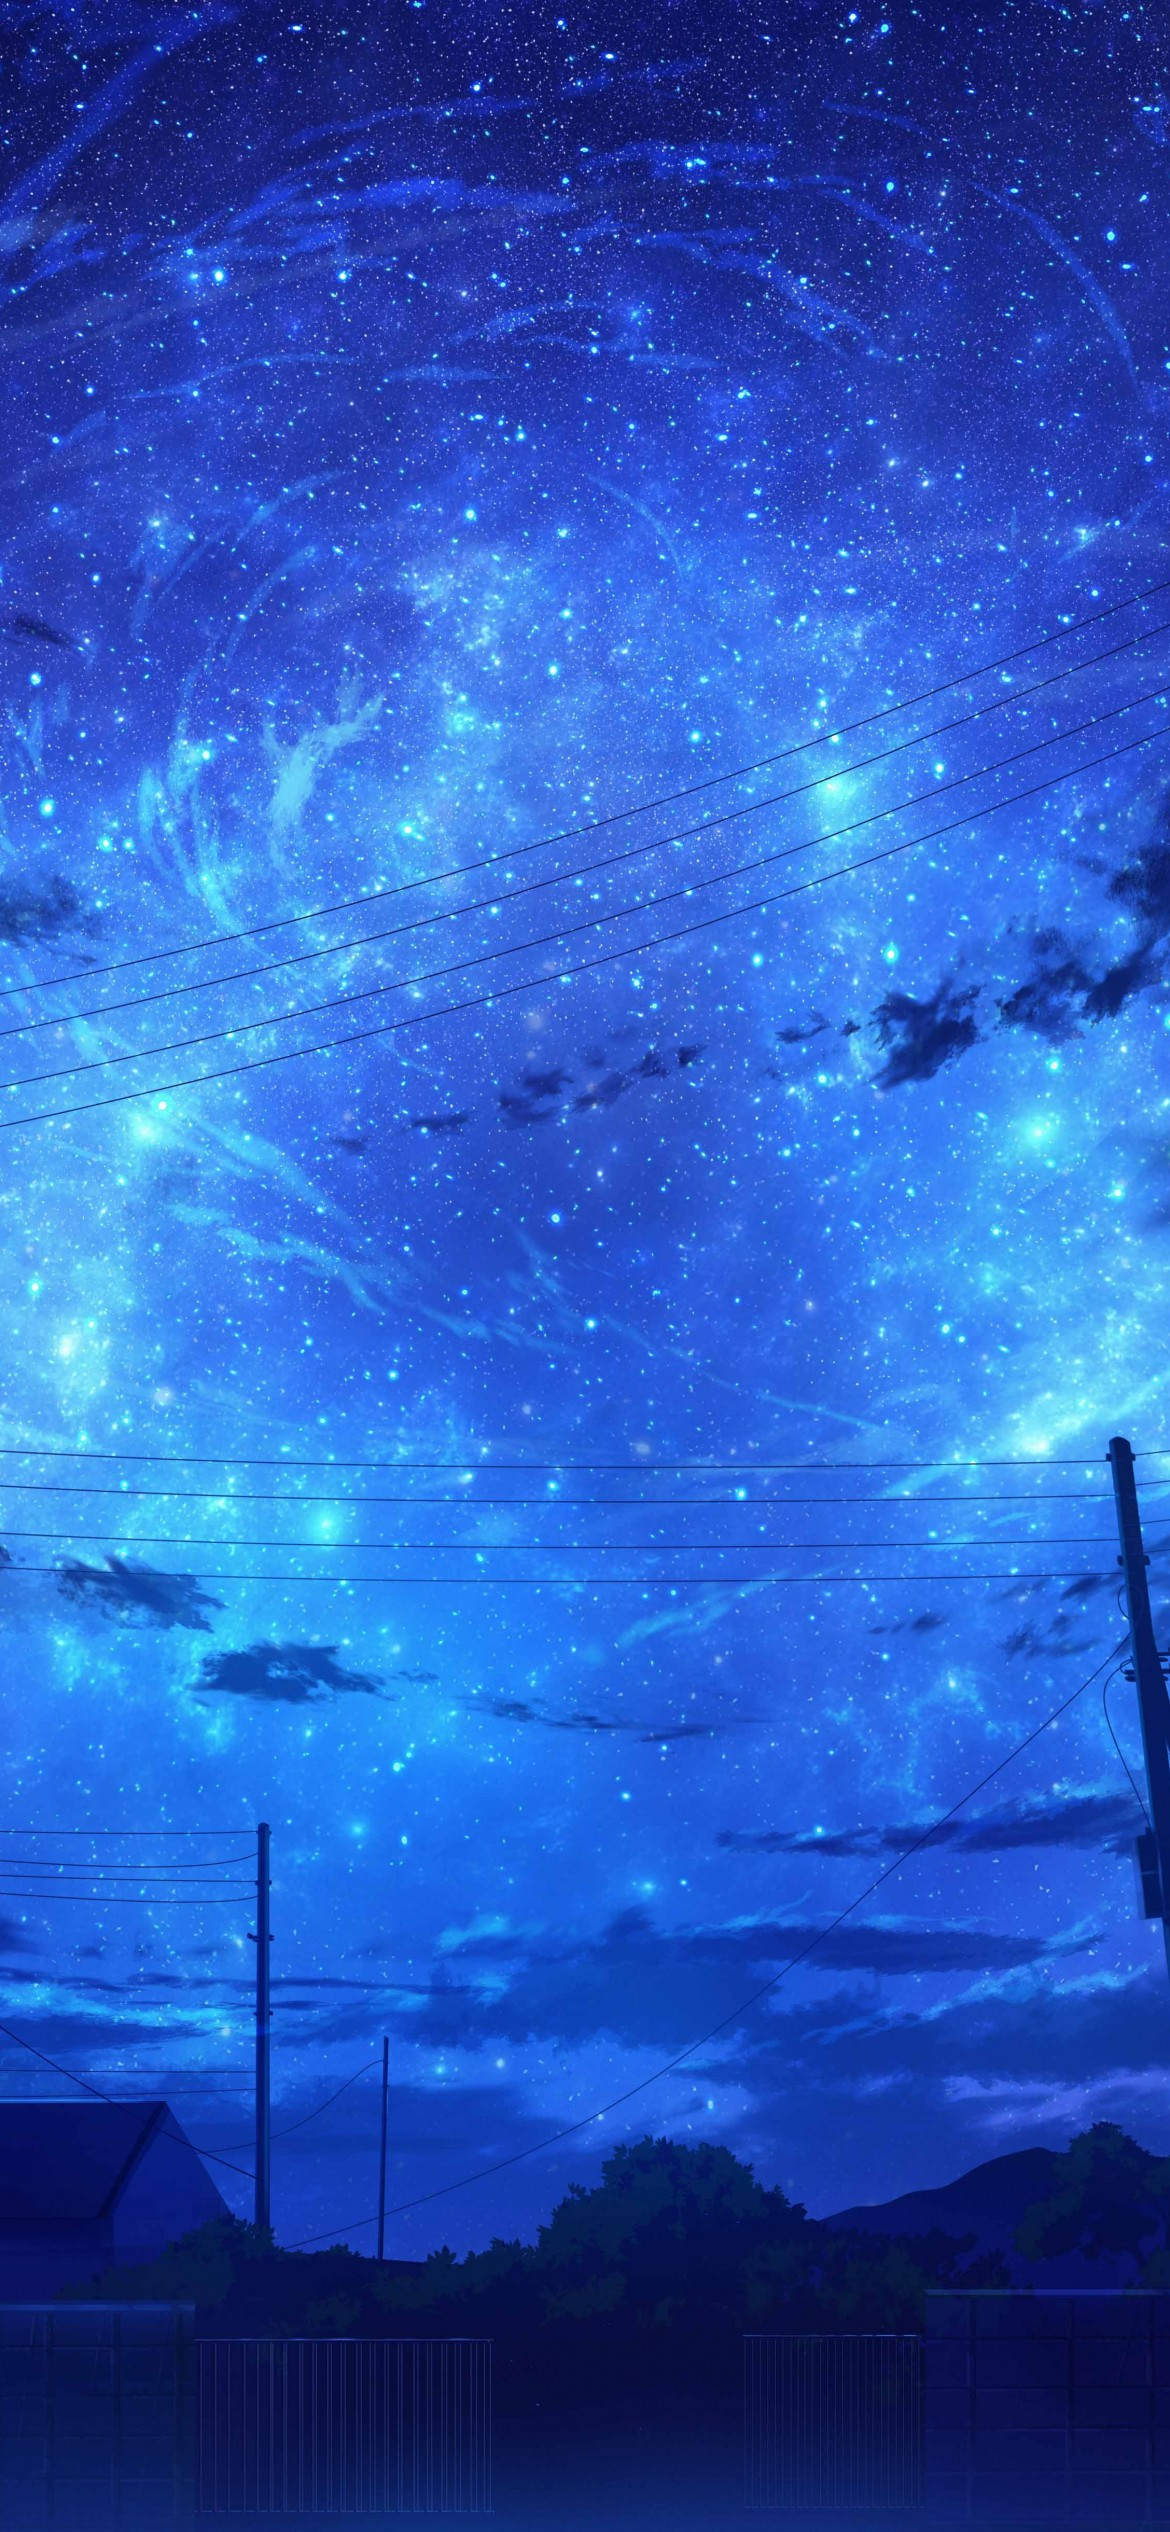 Download 1170x2532 Anime Landscape, Blue Sky, Clouds, Scenery, Starry Night Wallpaper for iPhone 12 Pro